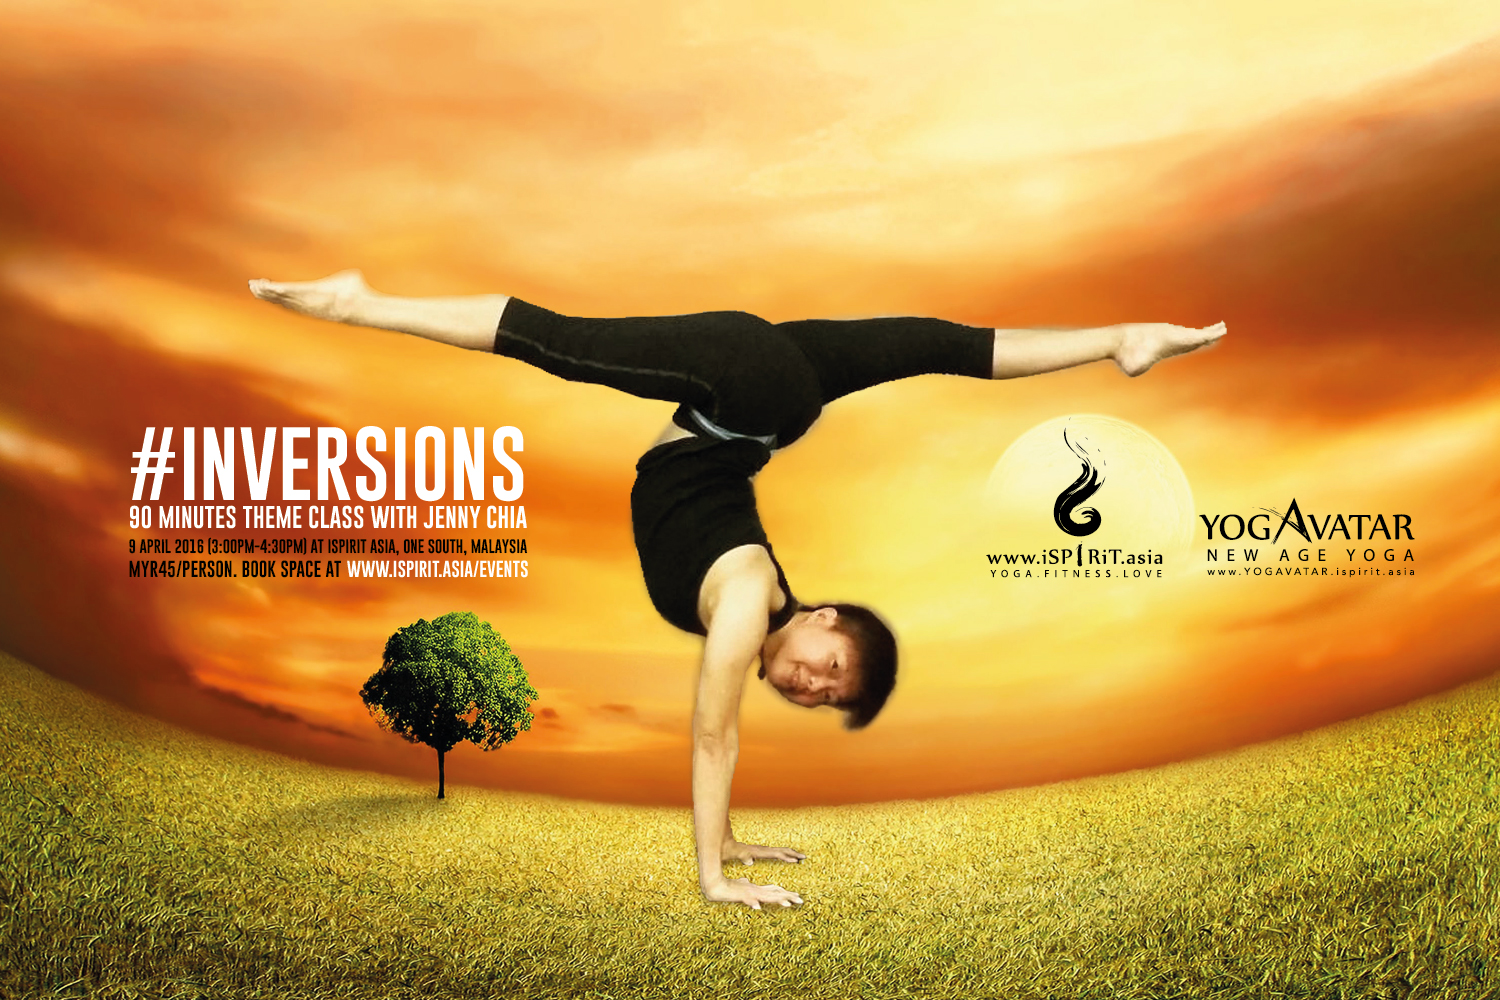 Inversions 90 minutes theme class with Jenny Chia